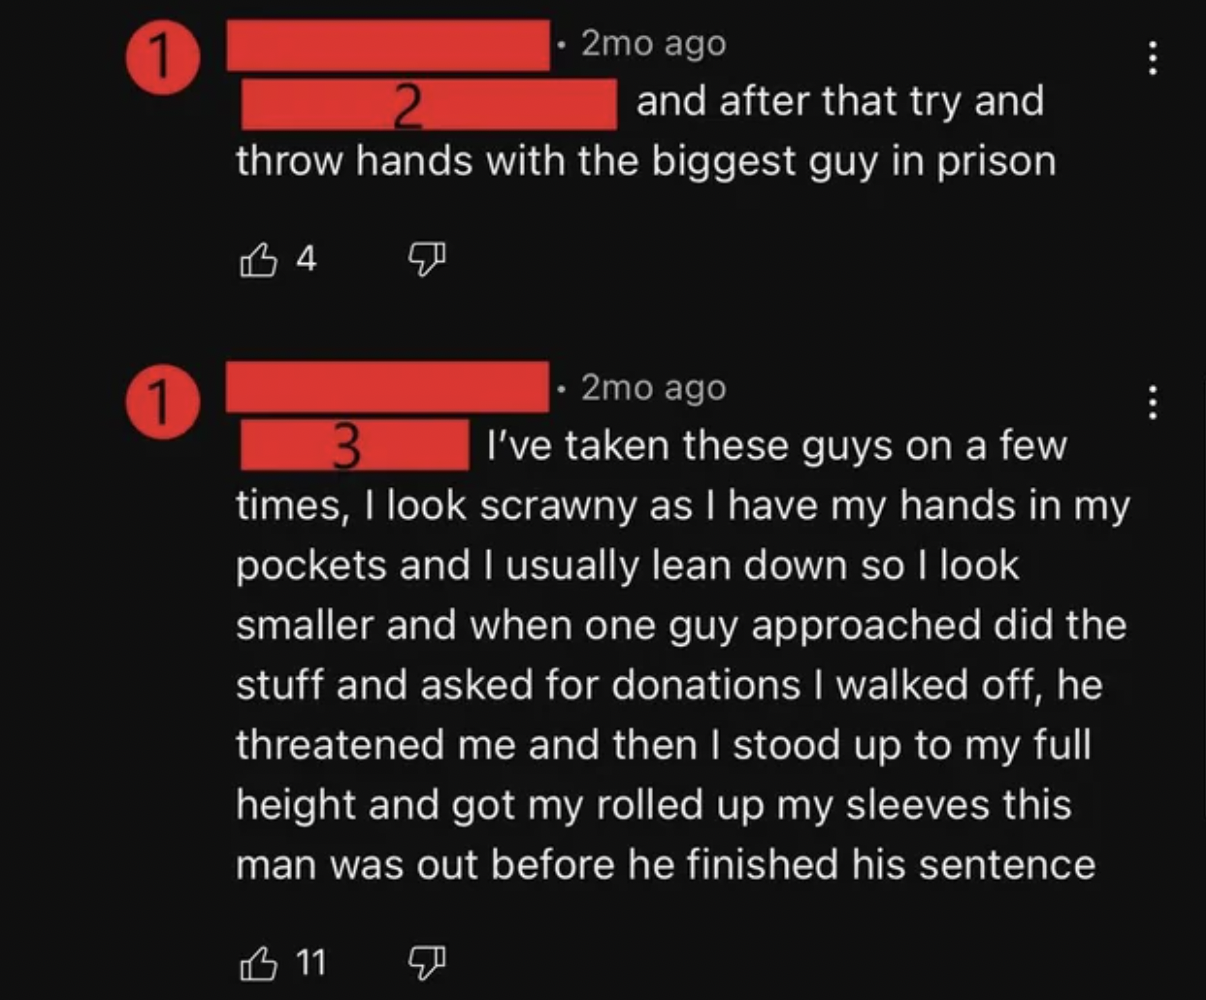 screenshot - 2mo ago and after that try and throw hands with the biggest guy in prison 've taken these guys on a few times, I look scrawny as I have my hands in my pockets and I usually lean down so I look smaller and when one guy approac